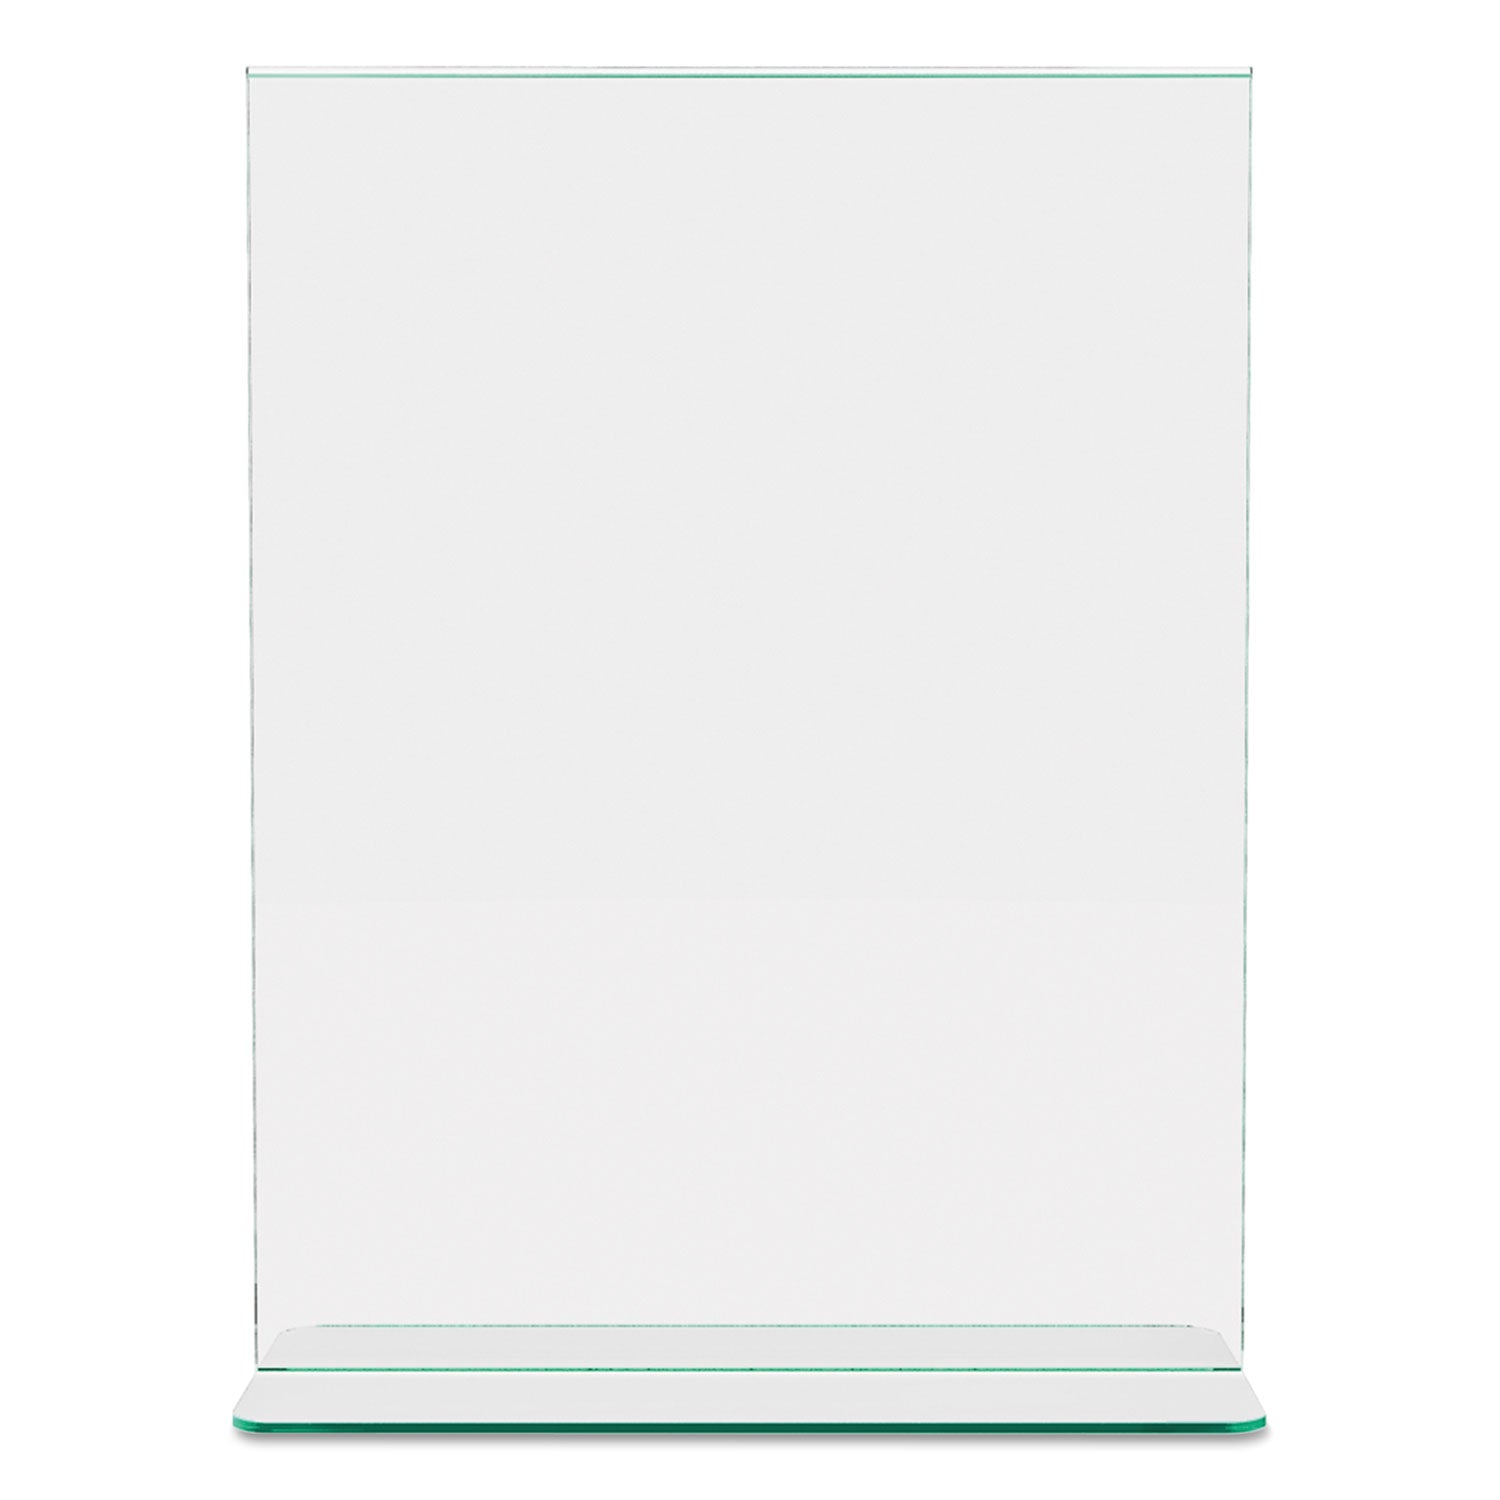 Superior Image Premium Green Edge Sign Holders, 8.5 x 11 Insert, Clear/Green - 